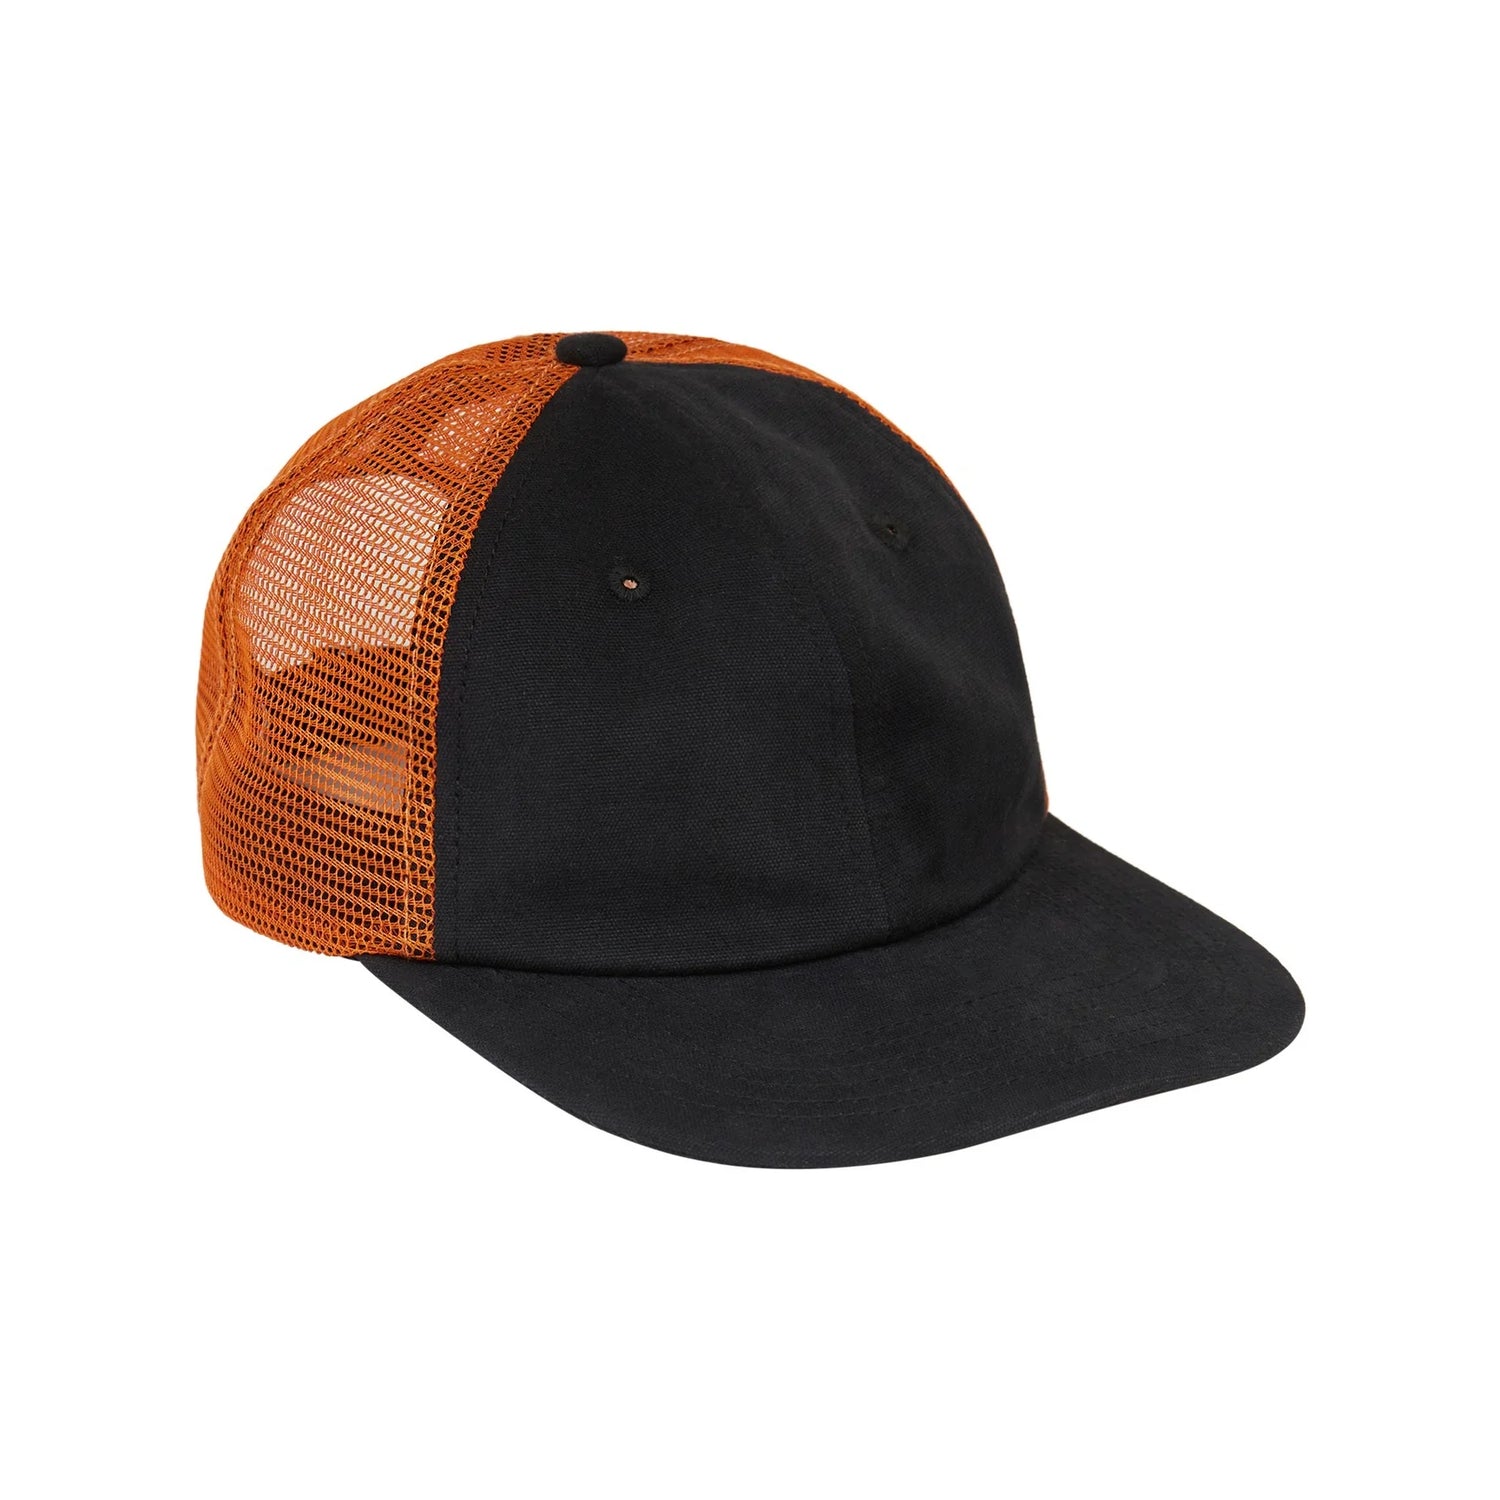 Only NY Interstate Mesh Hat - Black